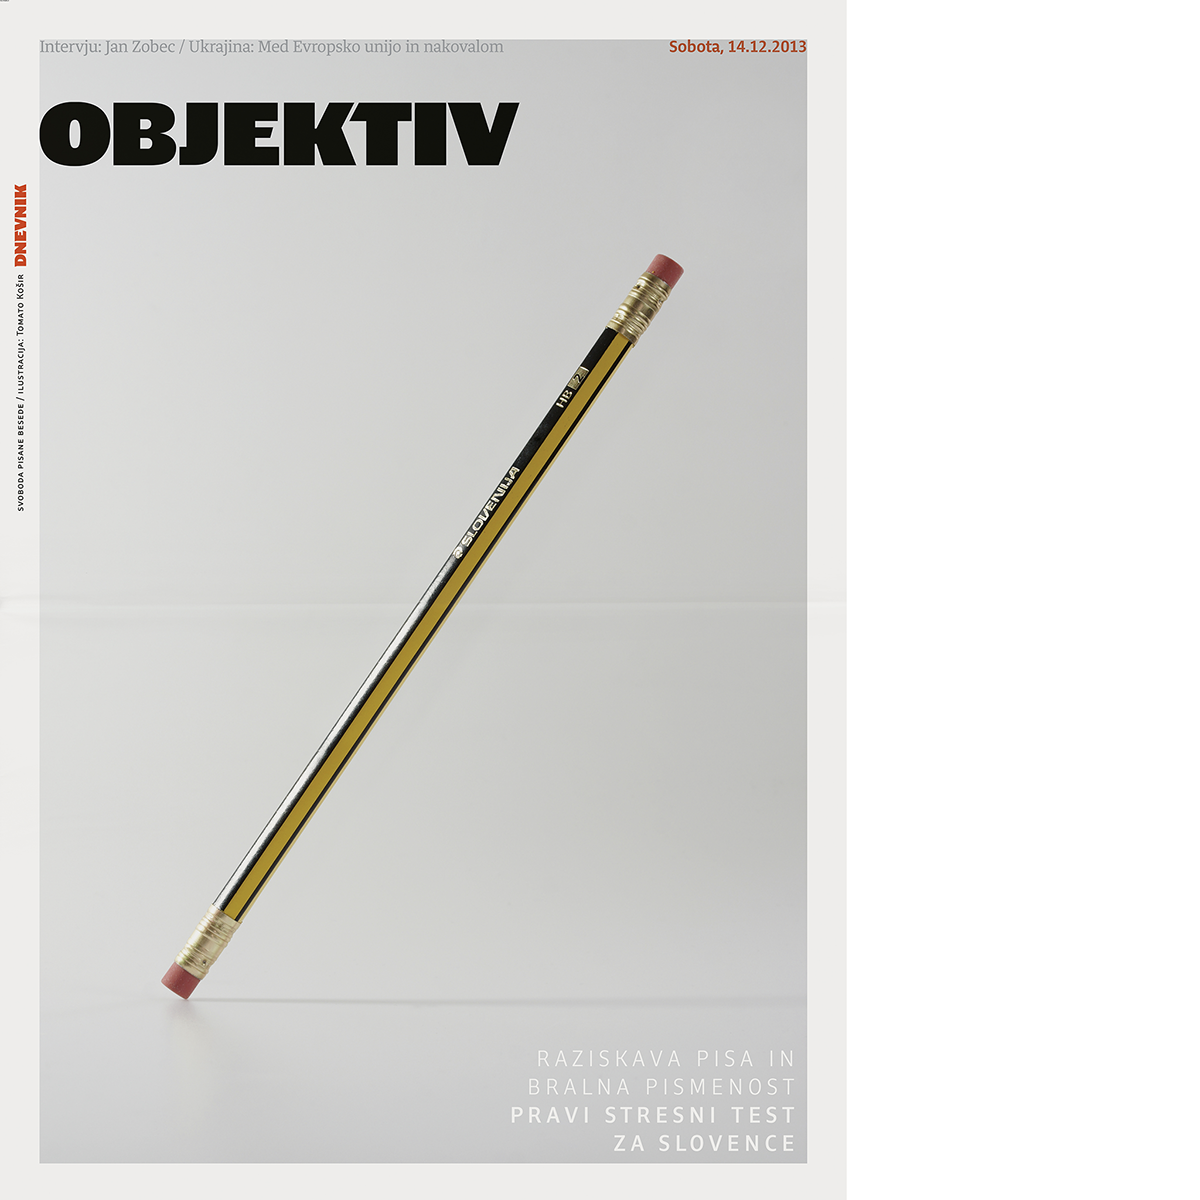 newspaper newspapers cover covers visual comentary political provocative Minimalism photoillustration TomatoKosir magazine frontpage ADC award